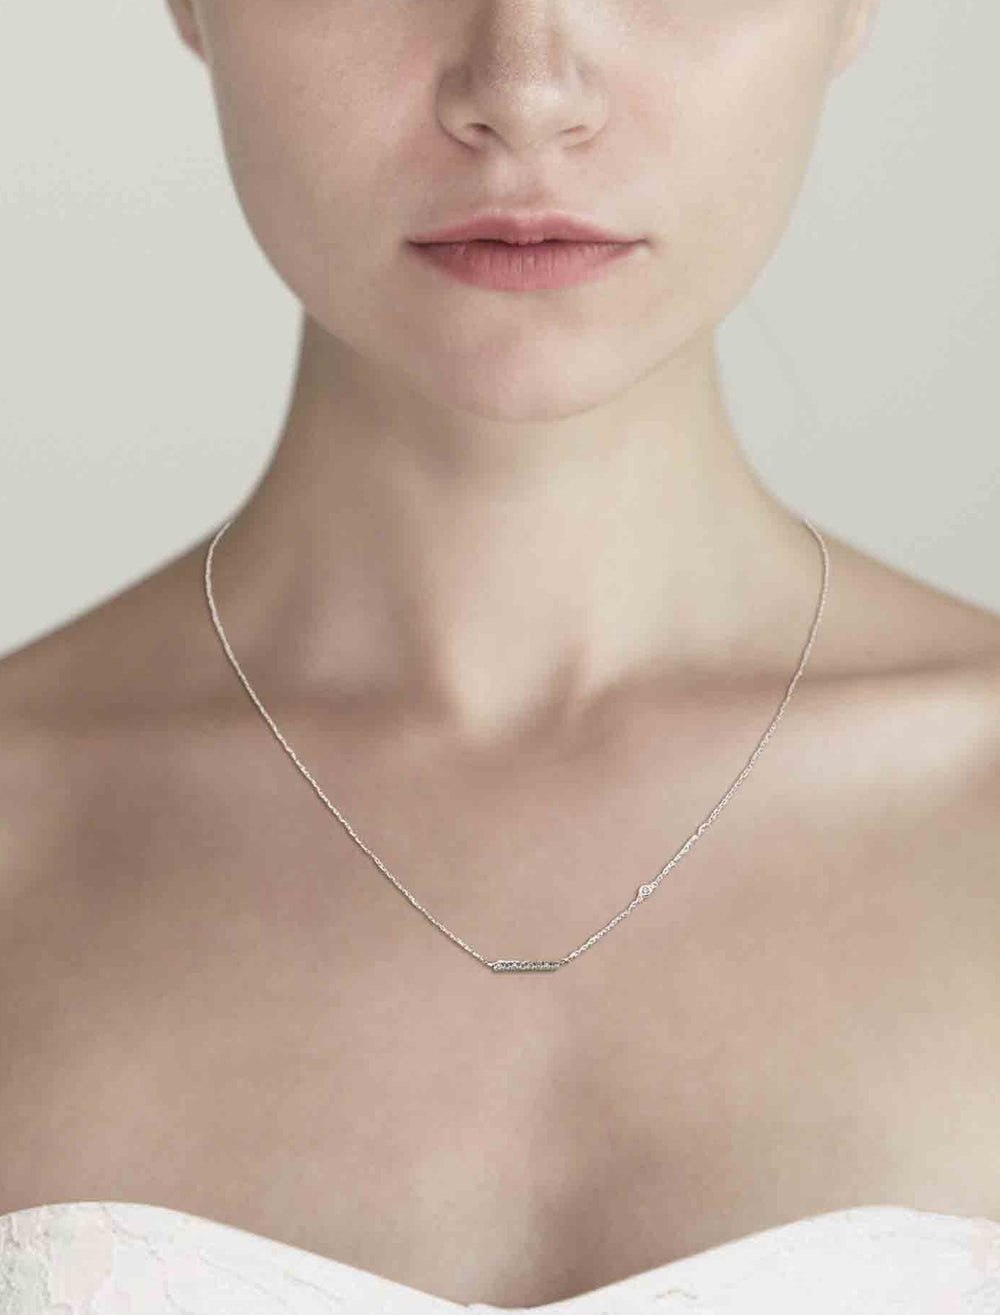 Model wearing Tai's horizontal bar necklace in silver with cz.